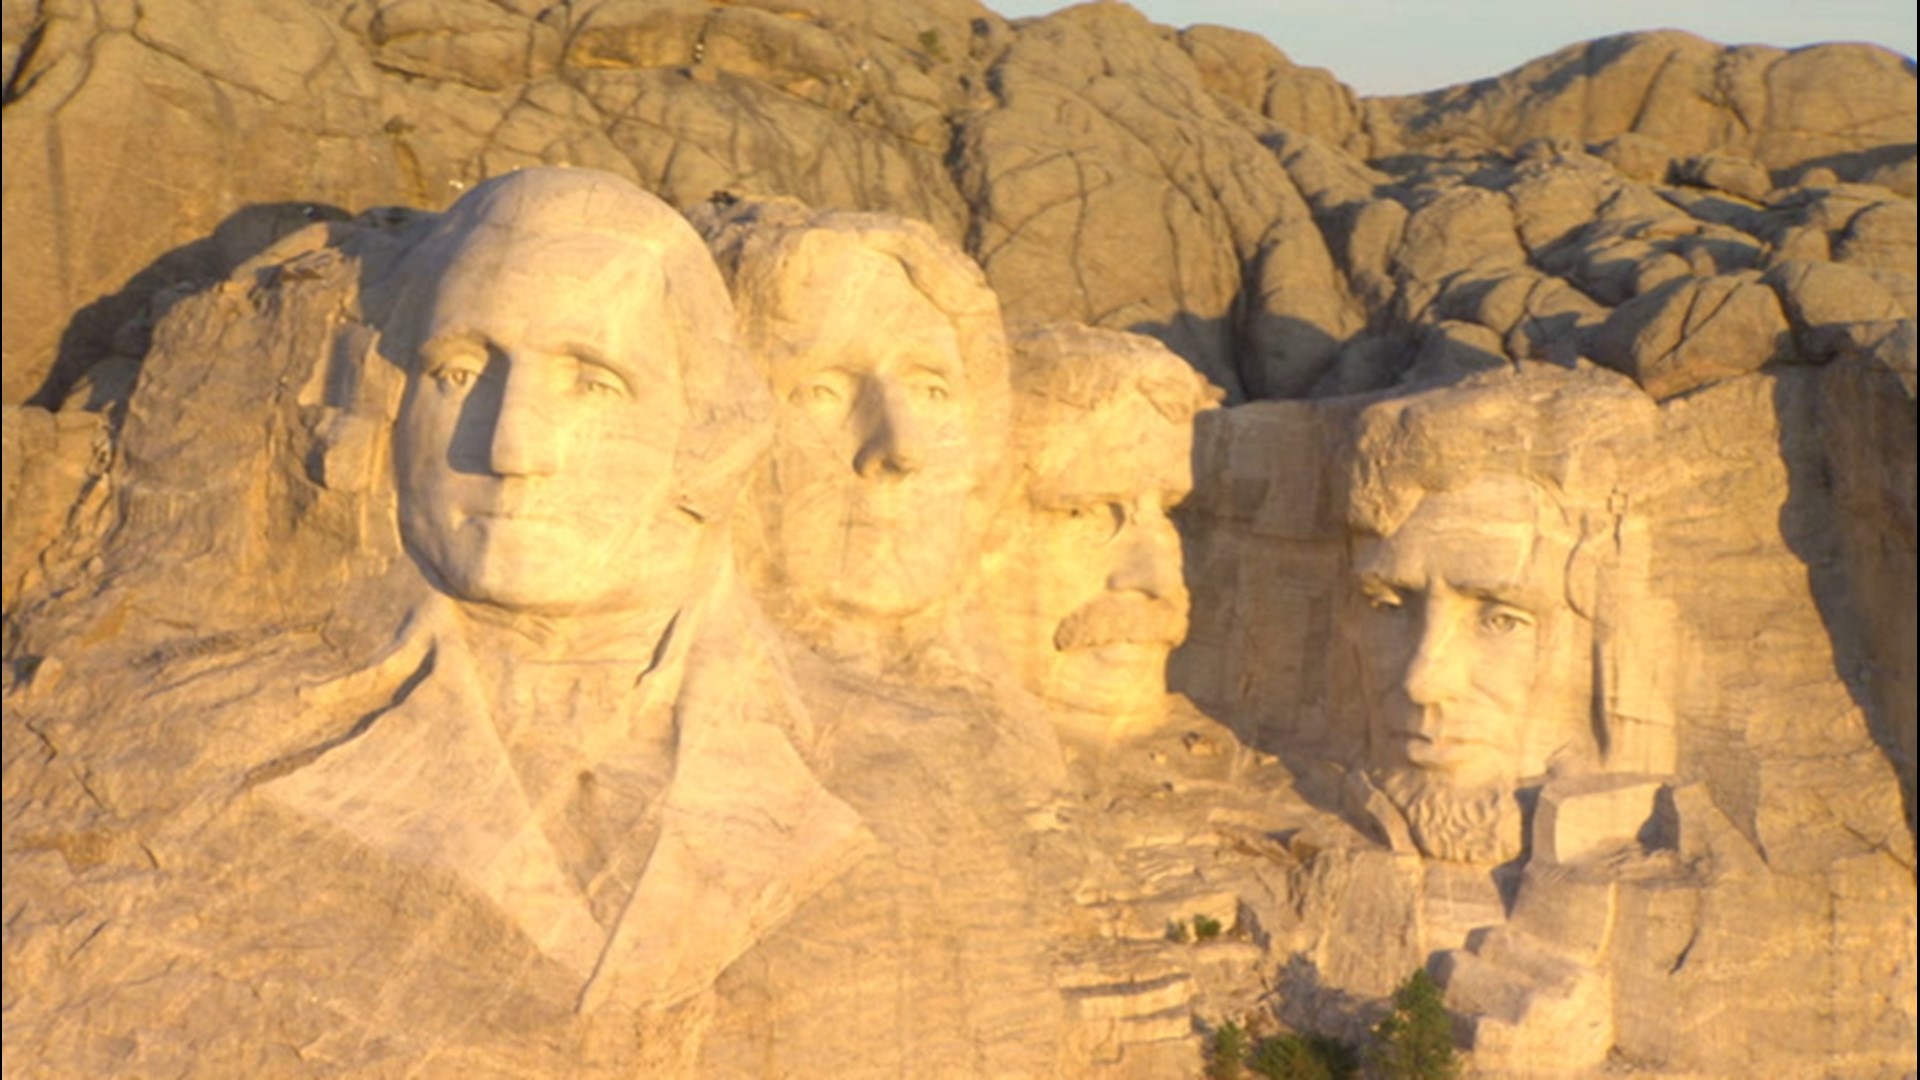 For the first time since 2009, a fireworks show is scheduled to be held at Mount Rushmore on July 3 to celebrate Independence Day, despite the wildfire risk.